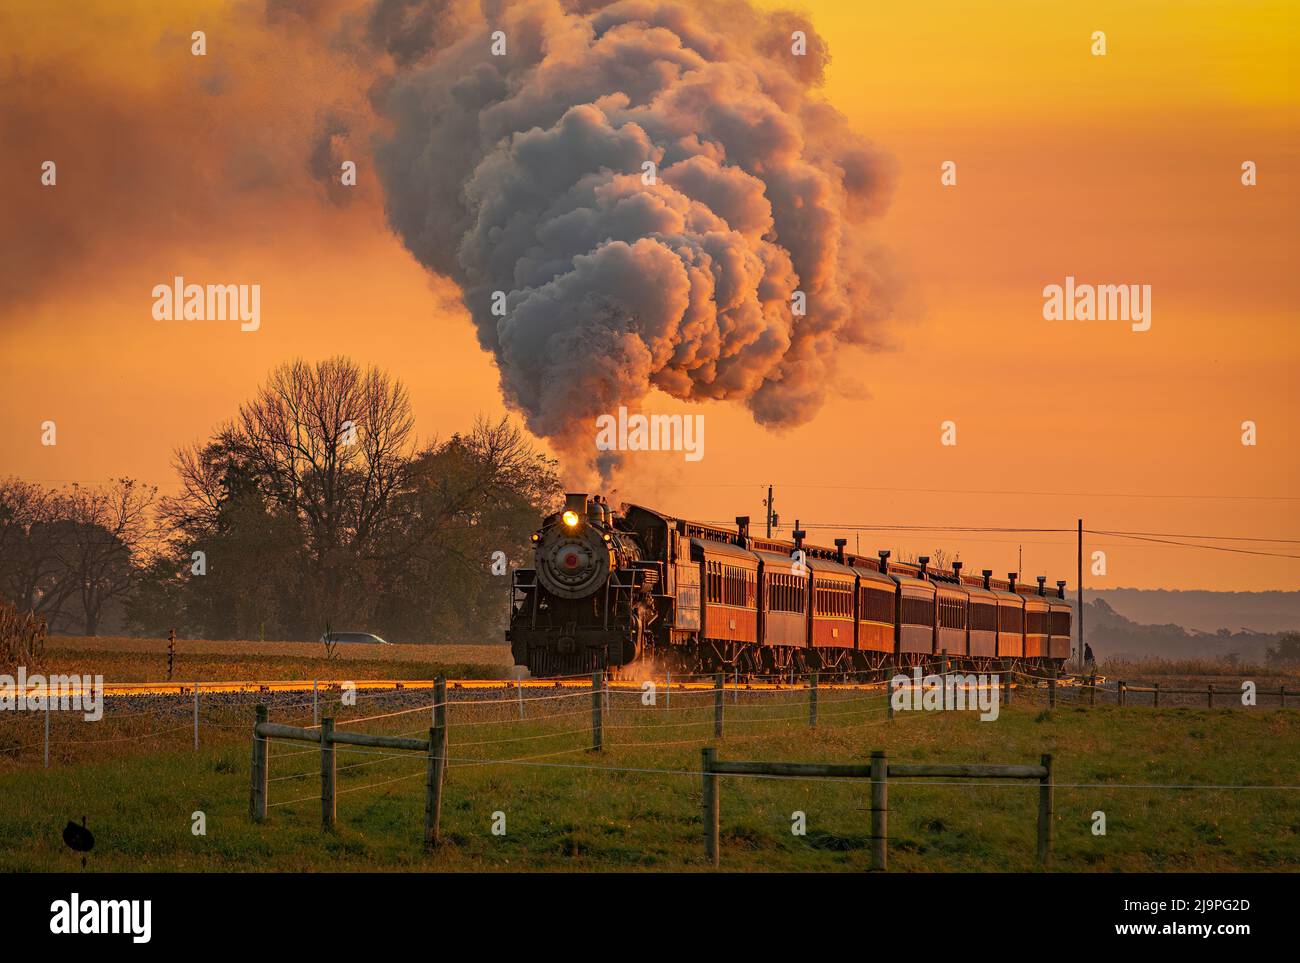 A View of an Antique Steam Passenger Train Approaching at Sunrise With a Full Head of Steam and Smoke Traveling Thru Farmlands Stock Photo